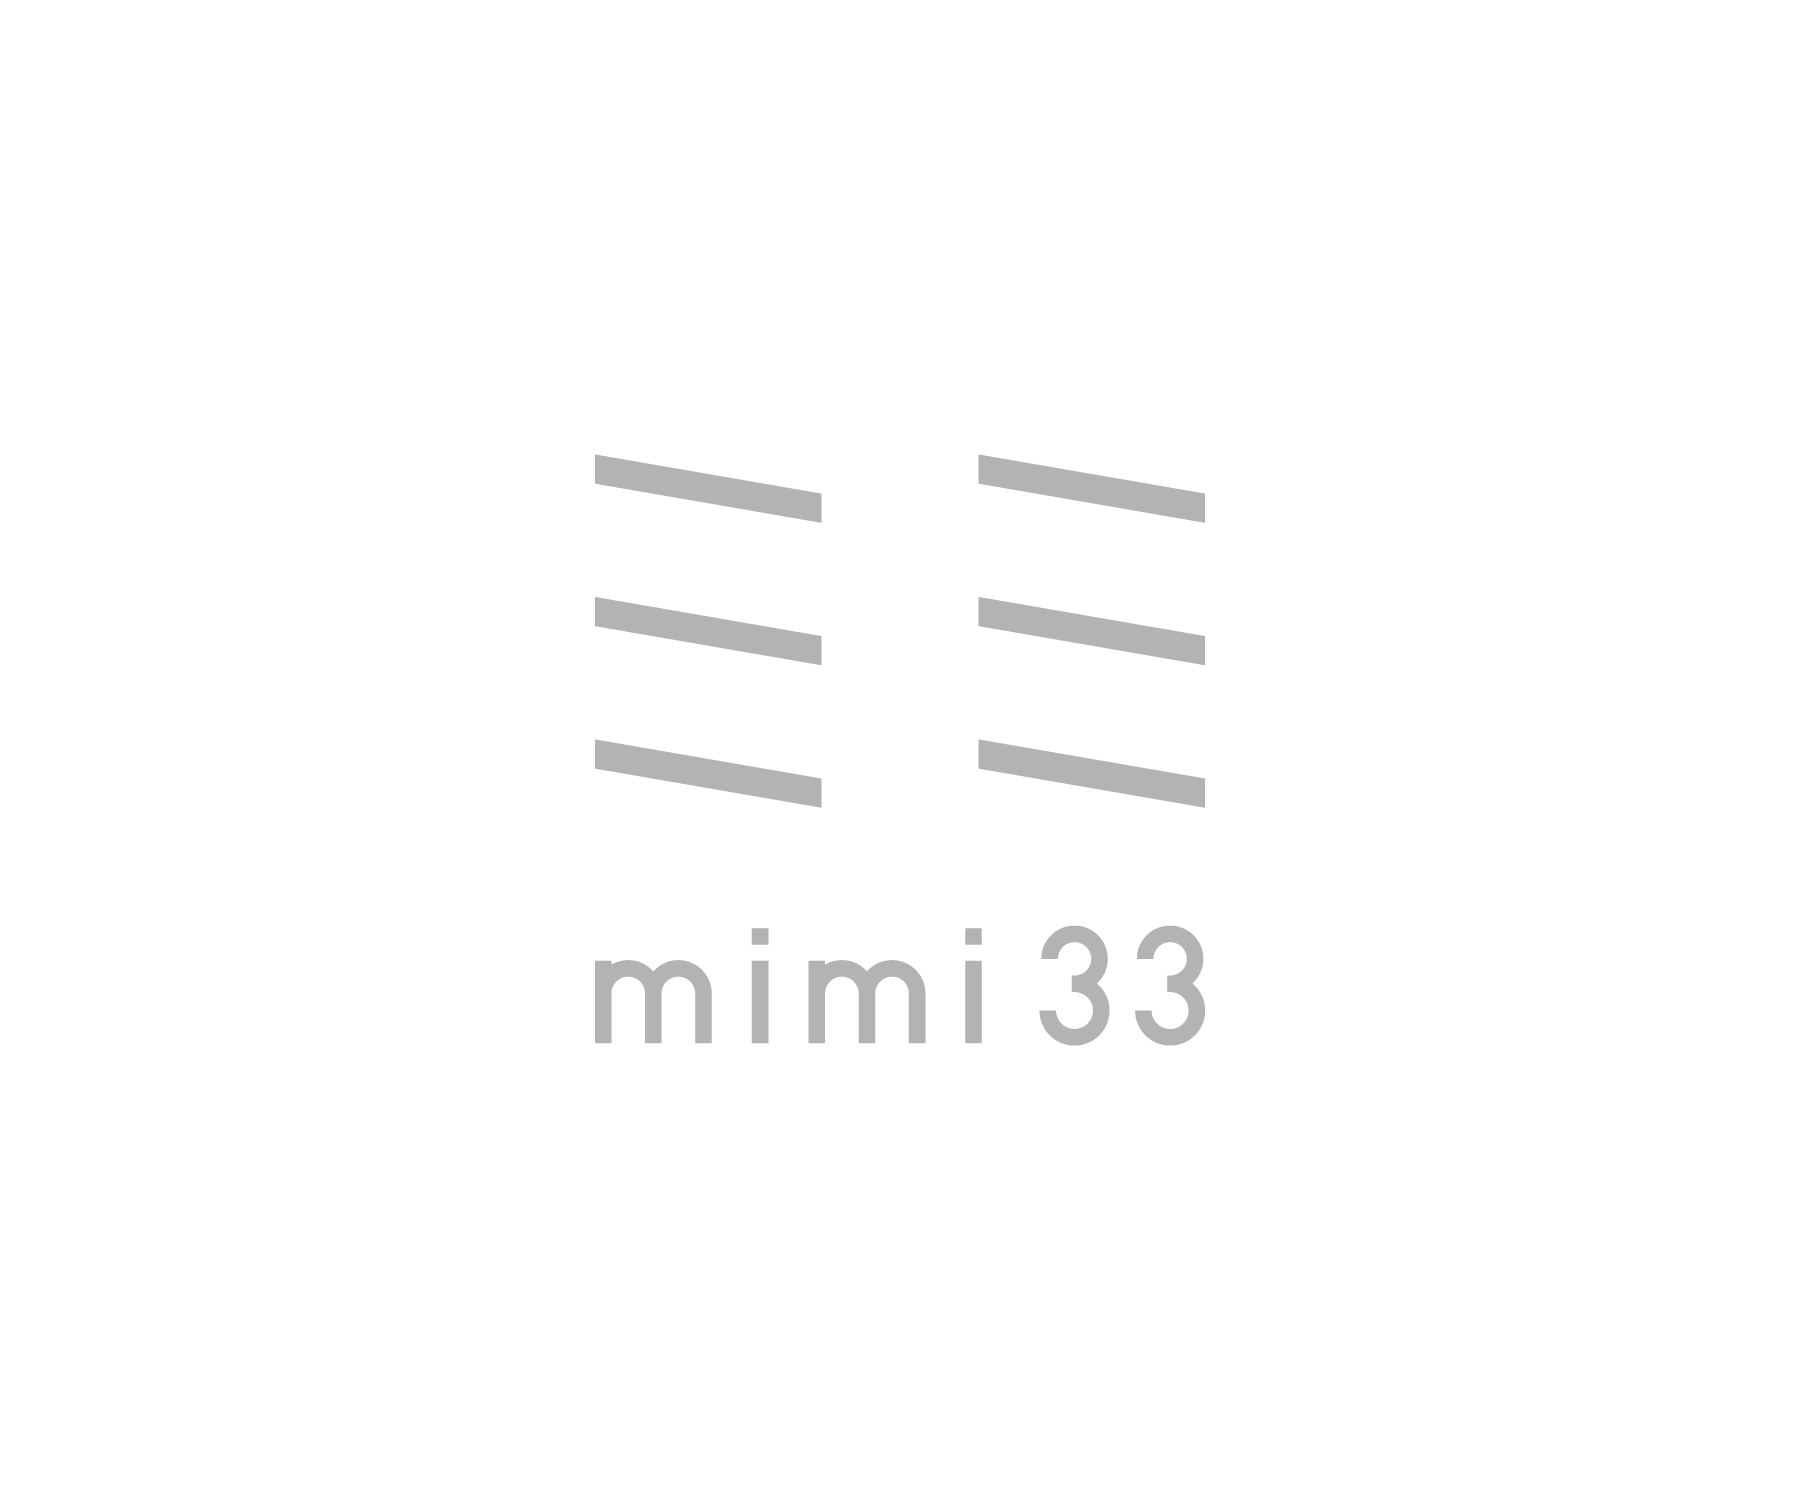 Back In Stock | mimi33 ONLINE STORE